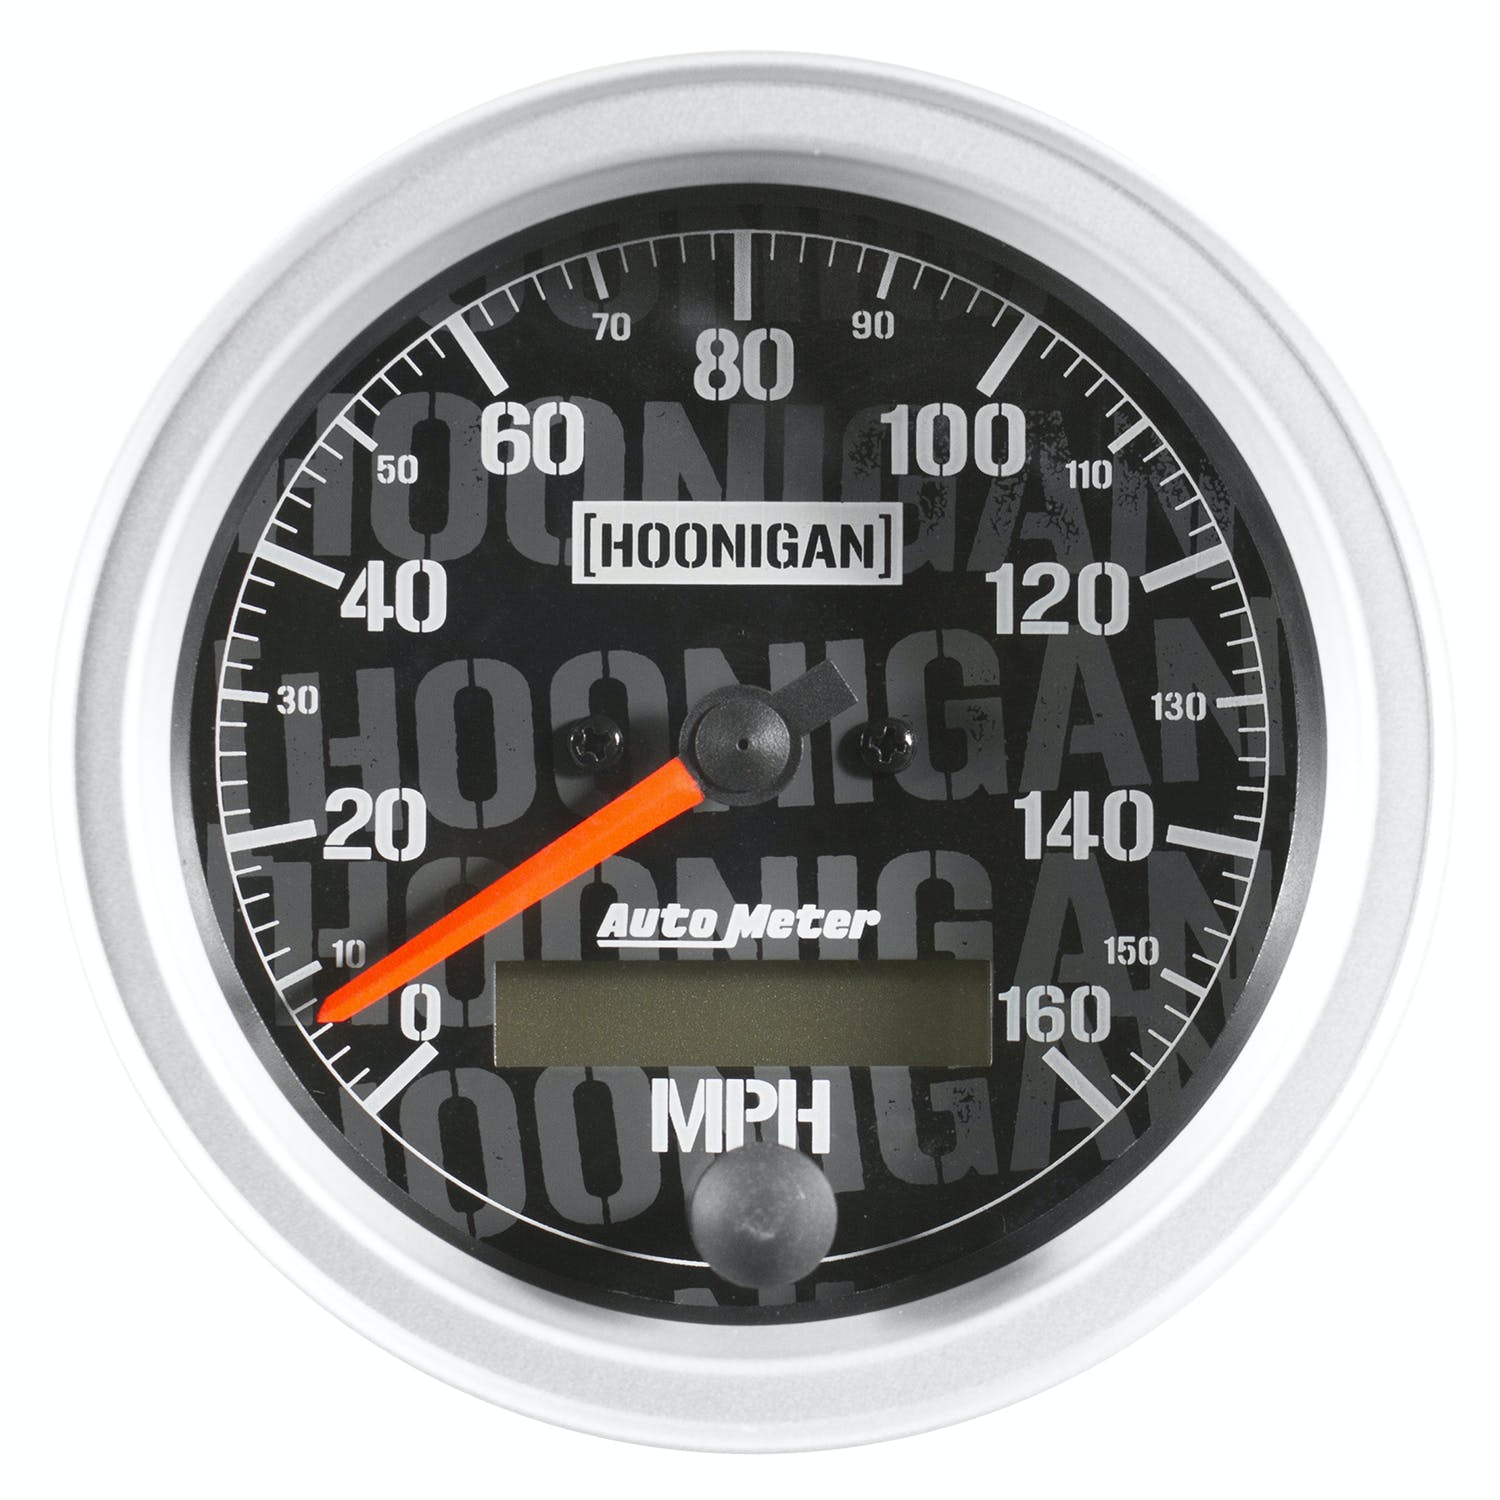 AutoMeter Products 4488-09000 Speed Gauge 3 3/8, 160mph Electric Program with LCD ODO Hoonigan